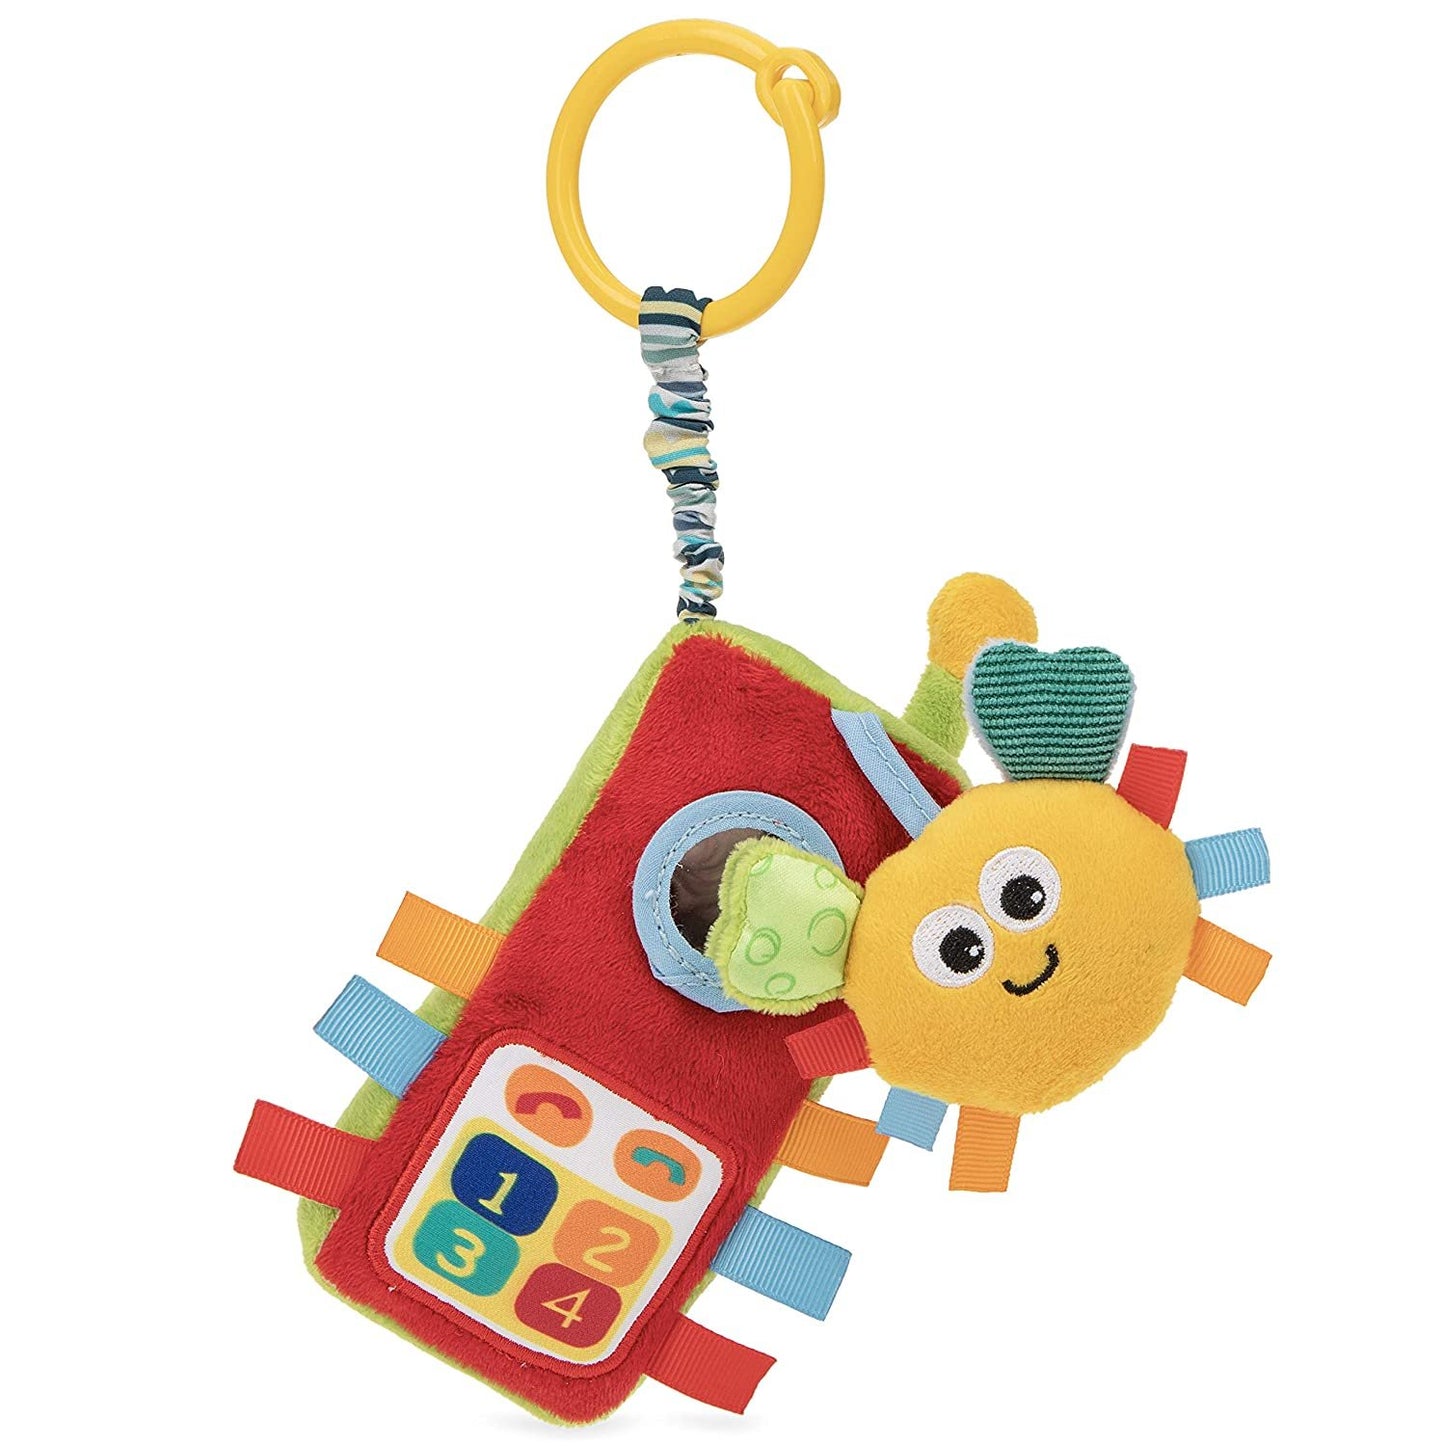 Nuby Plush Phone Pals Musical Hanging Toy with Connector Ring: 0M+, Multi